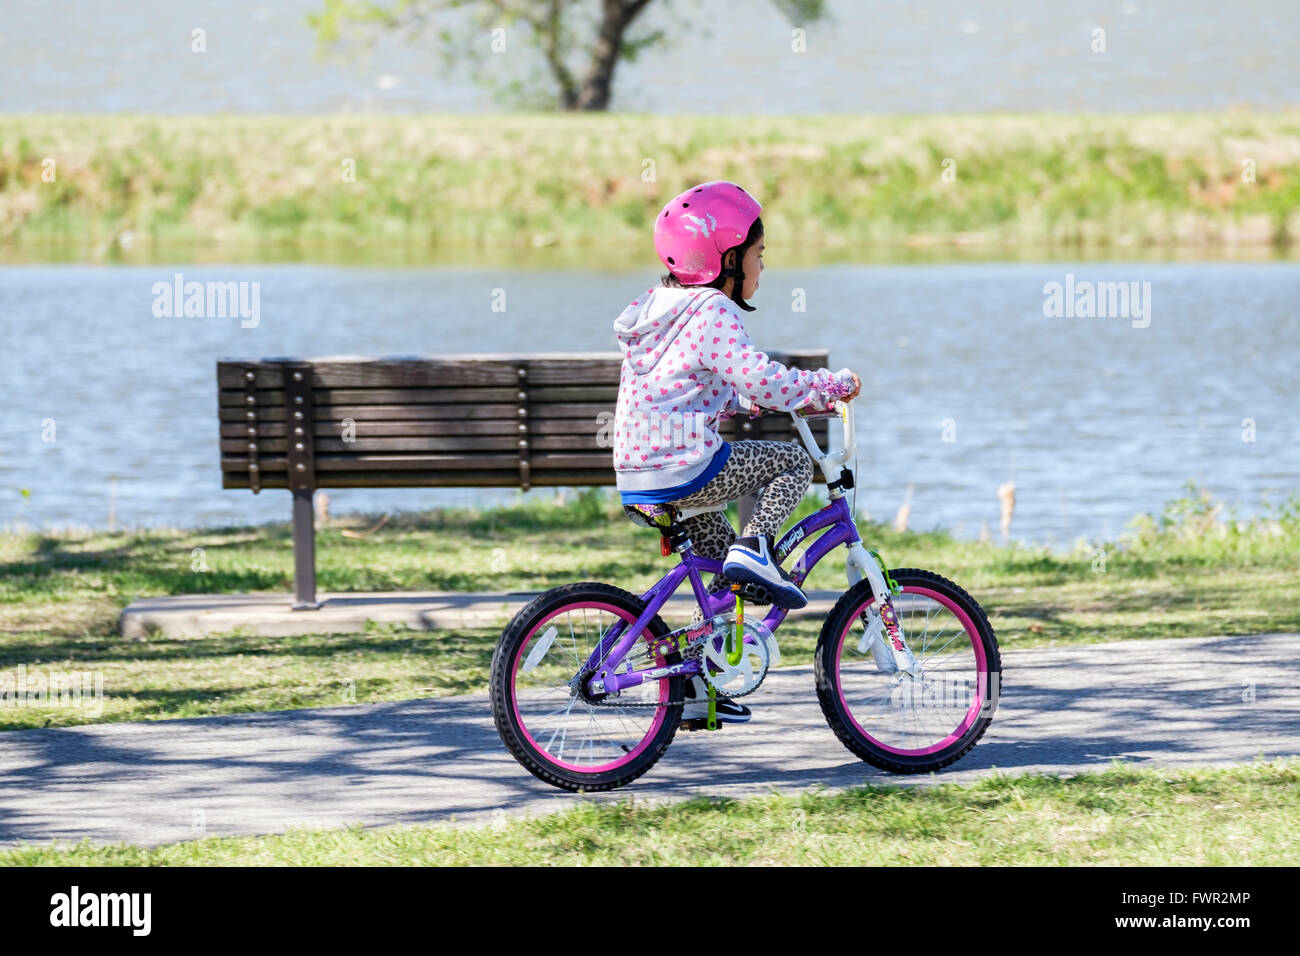 A small Hispanic girl rides her bicycle for exercise on the Overholser lake trails in Oklahoma City, Oklahoma, USA. Stock Photo